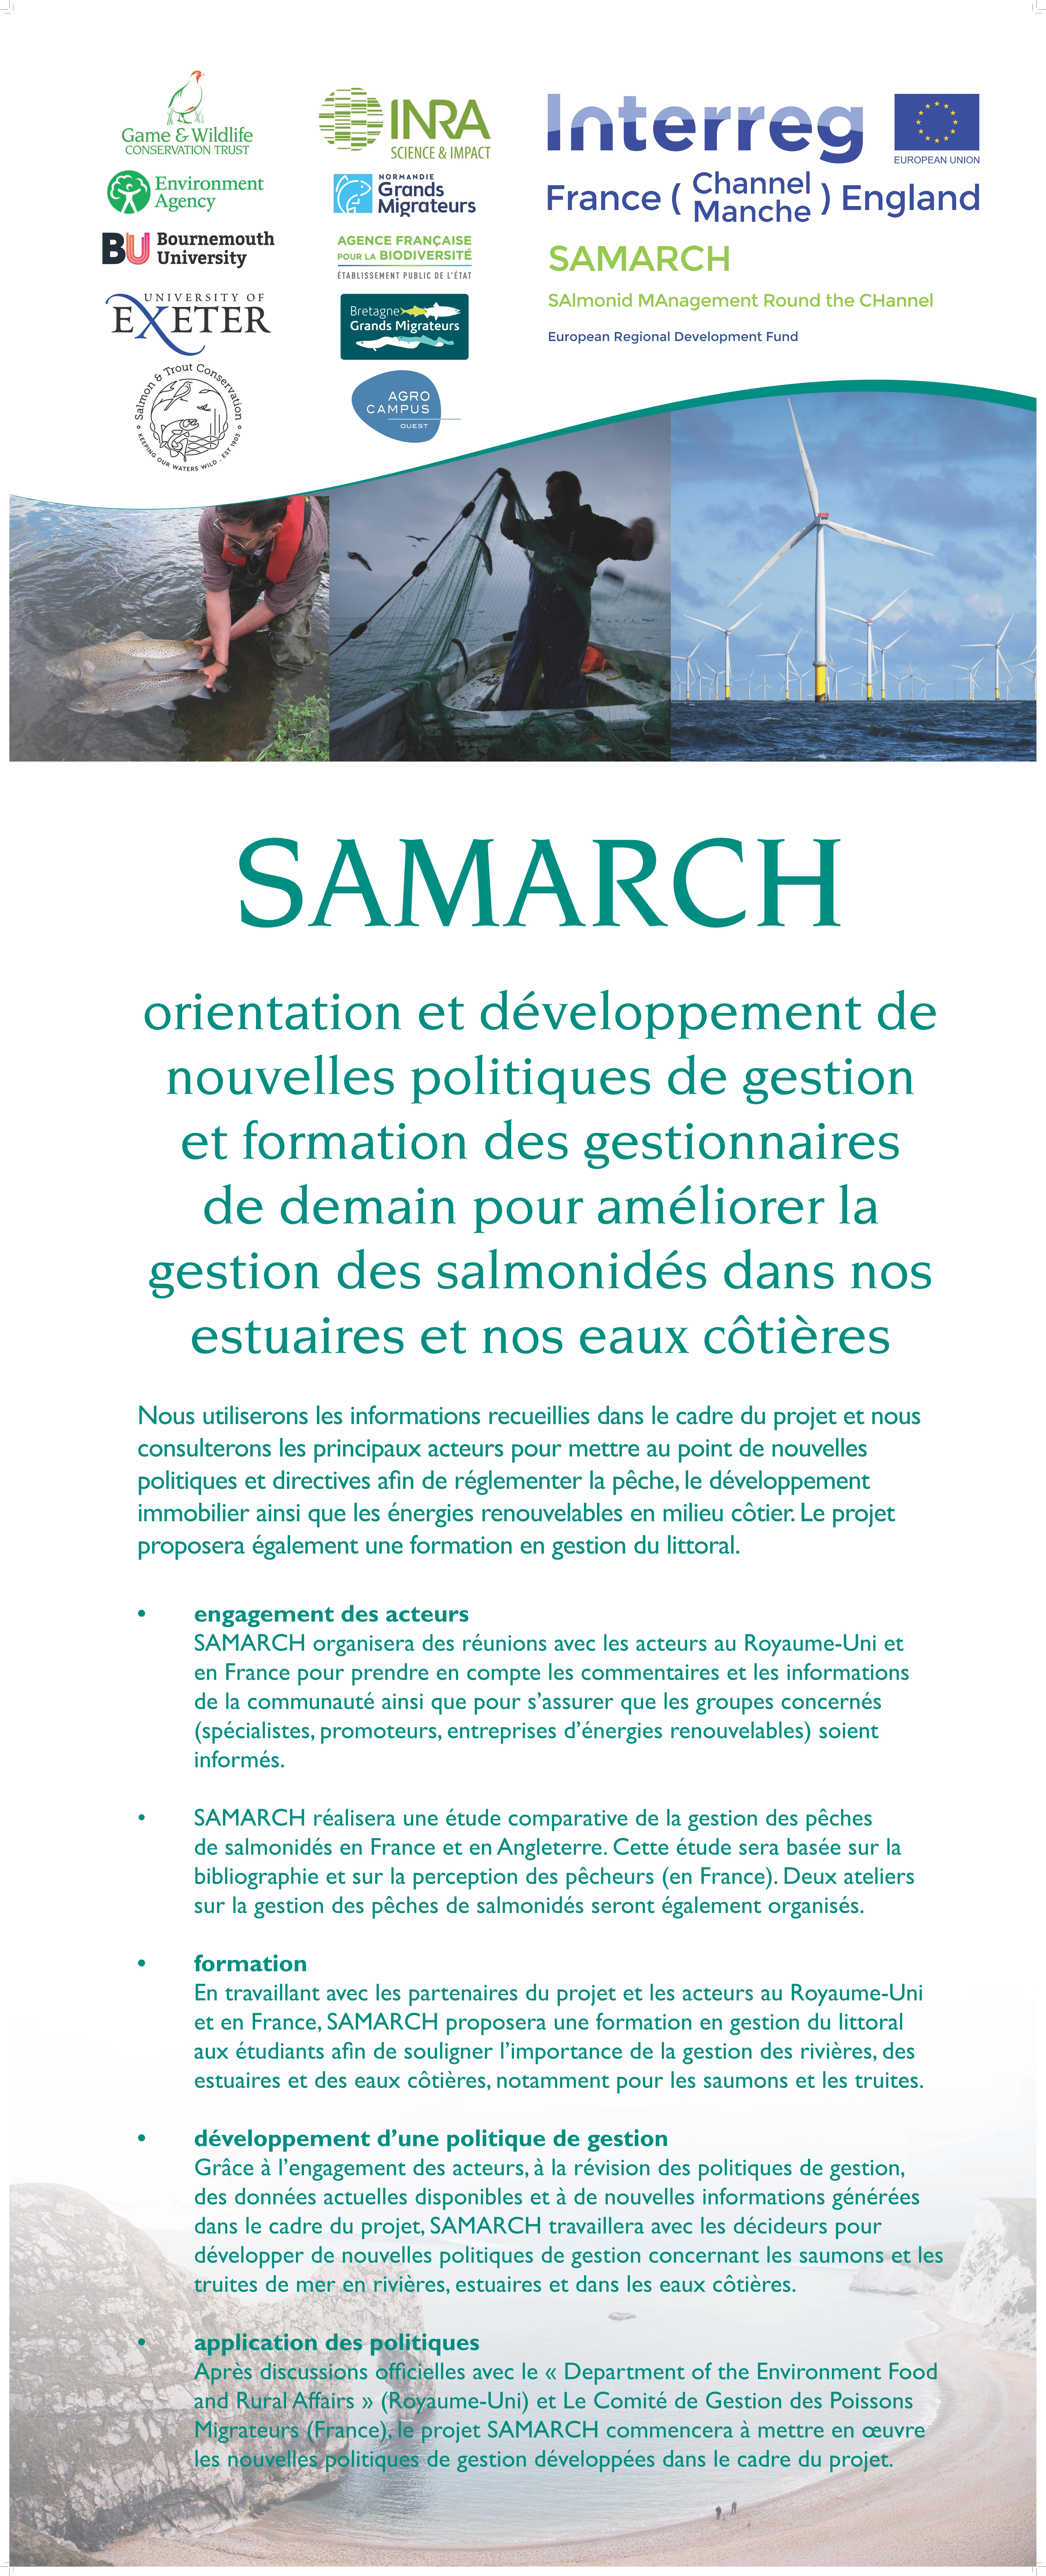 SAMARCH Banners French Nov 2017 Page 6